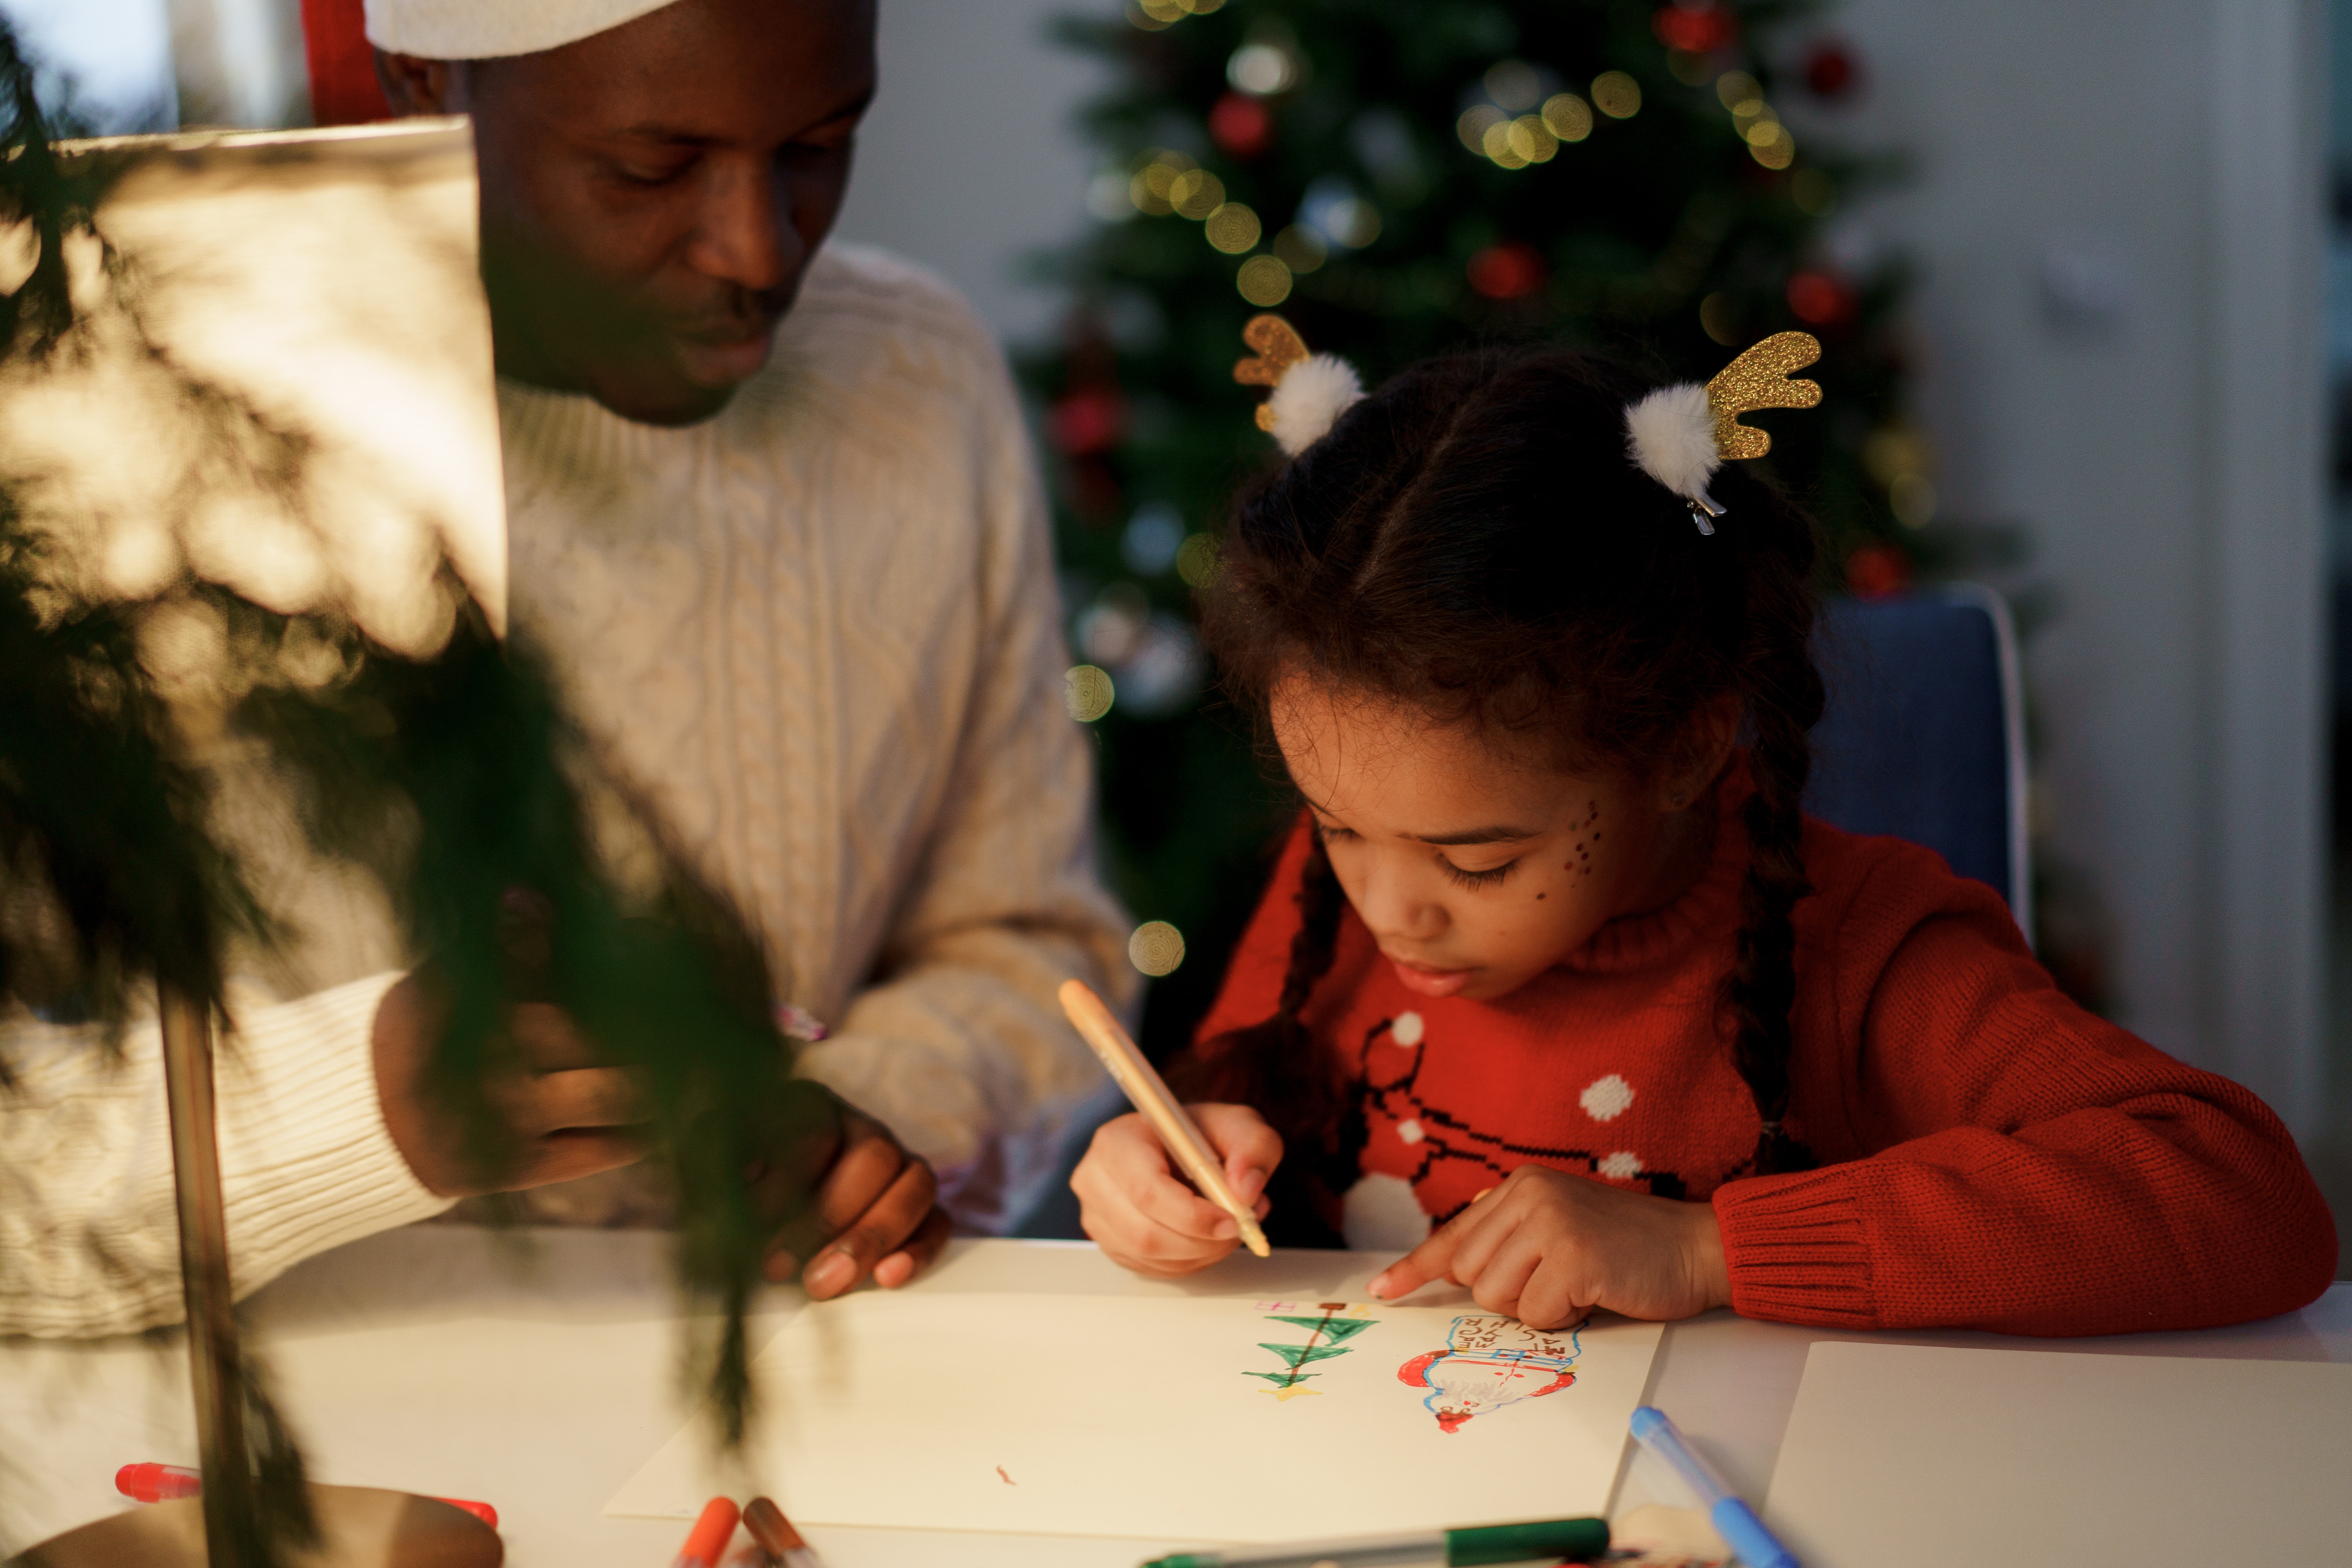 Wrapping the year that's been with your child